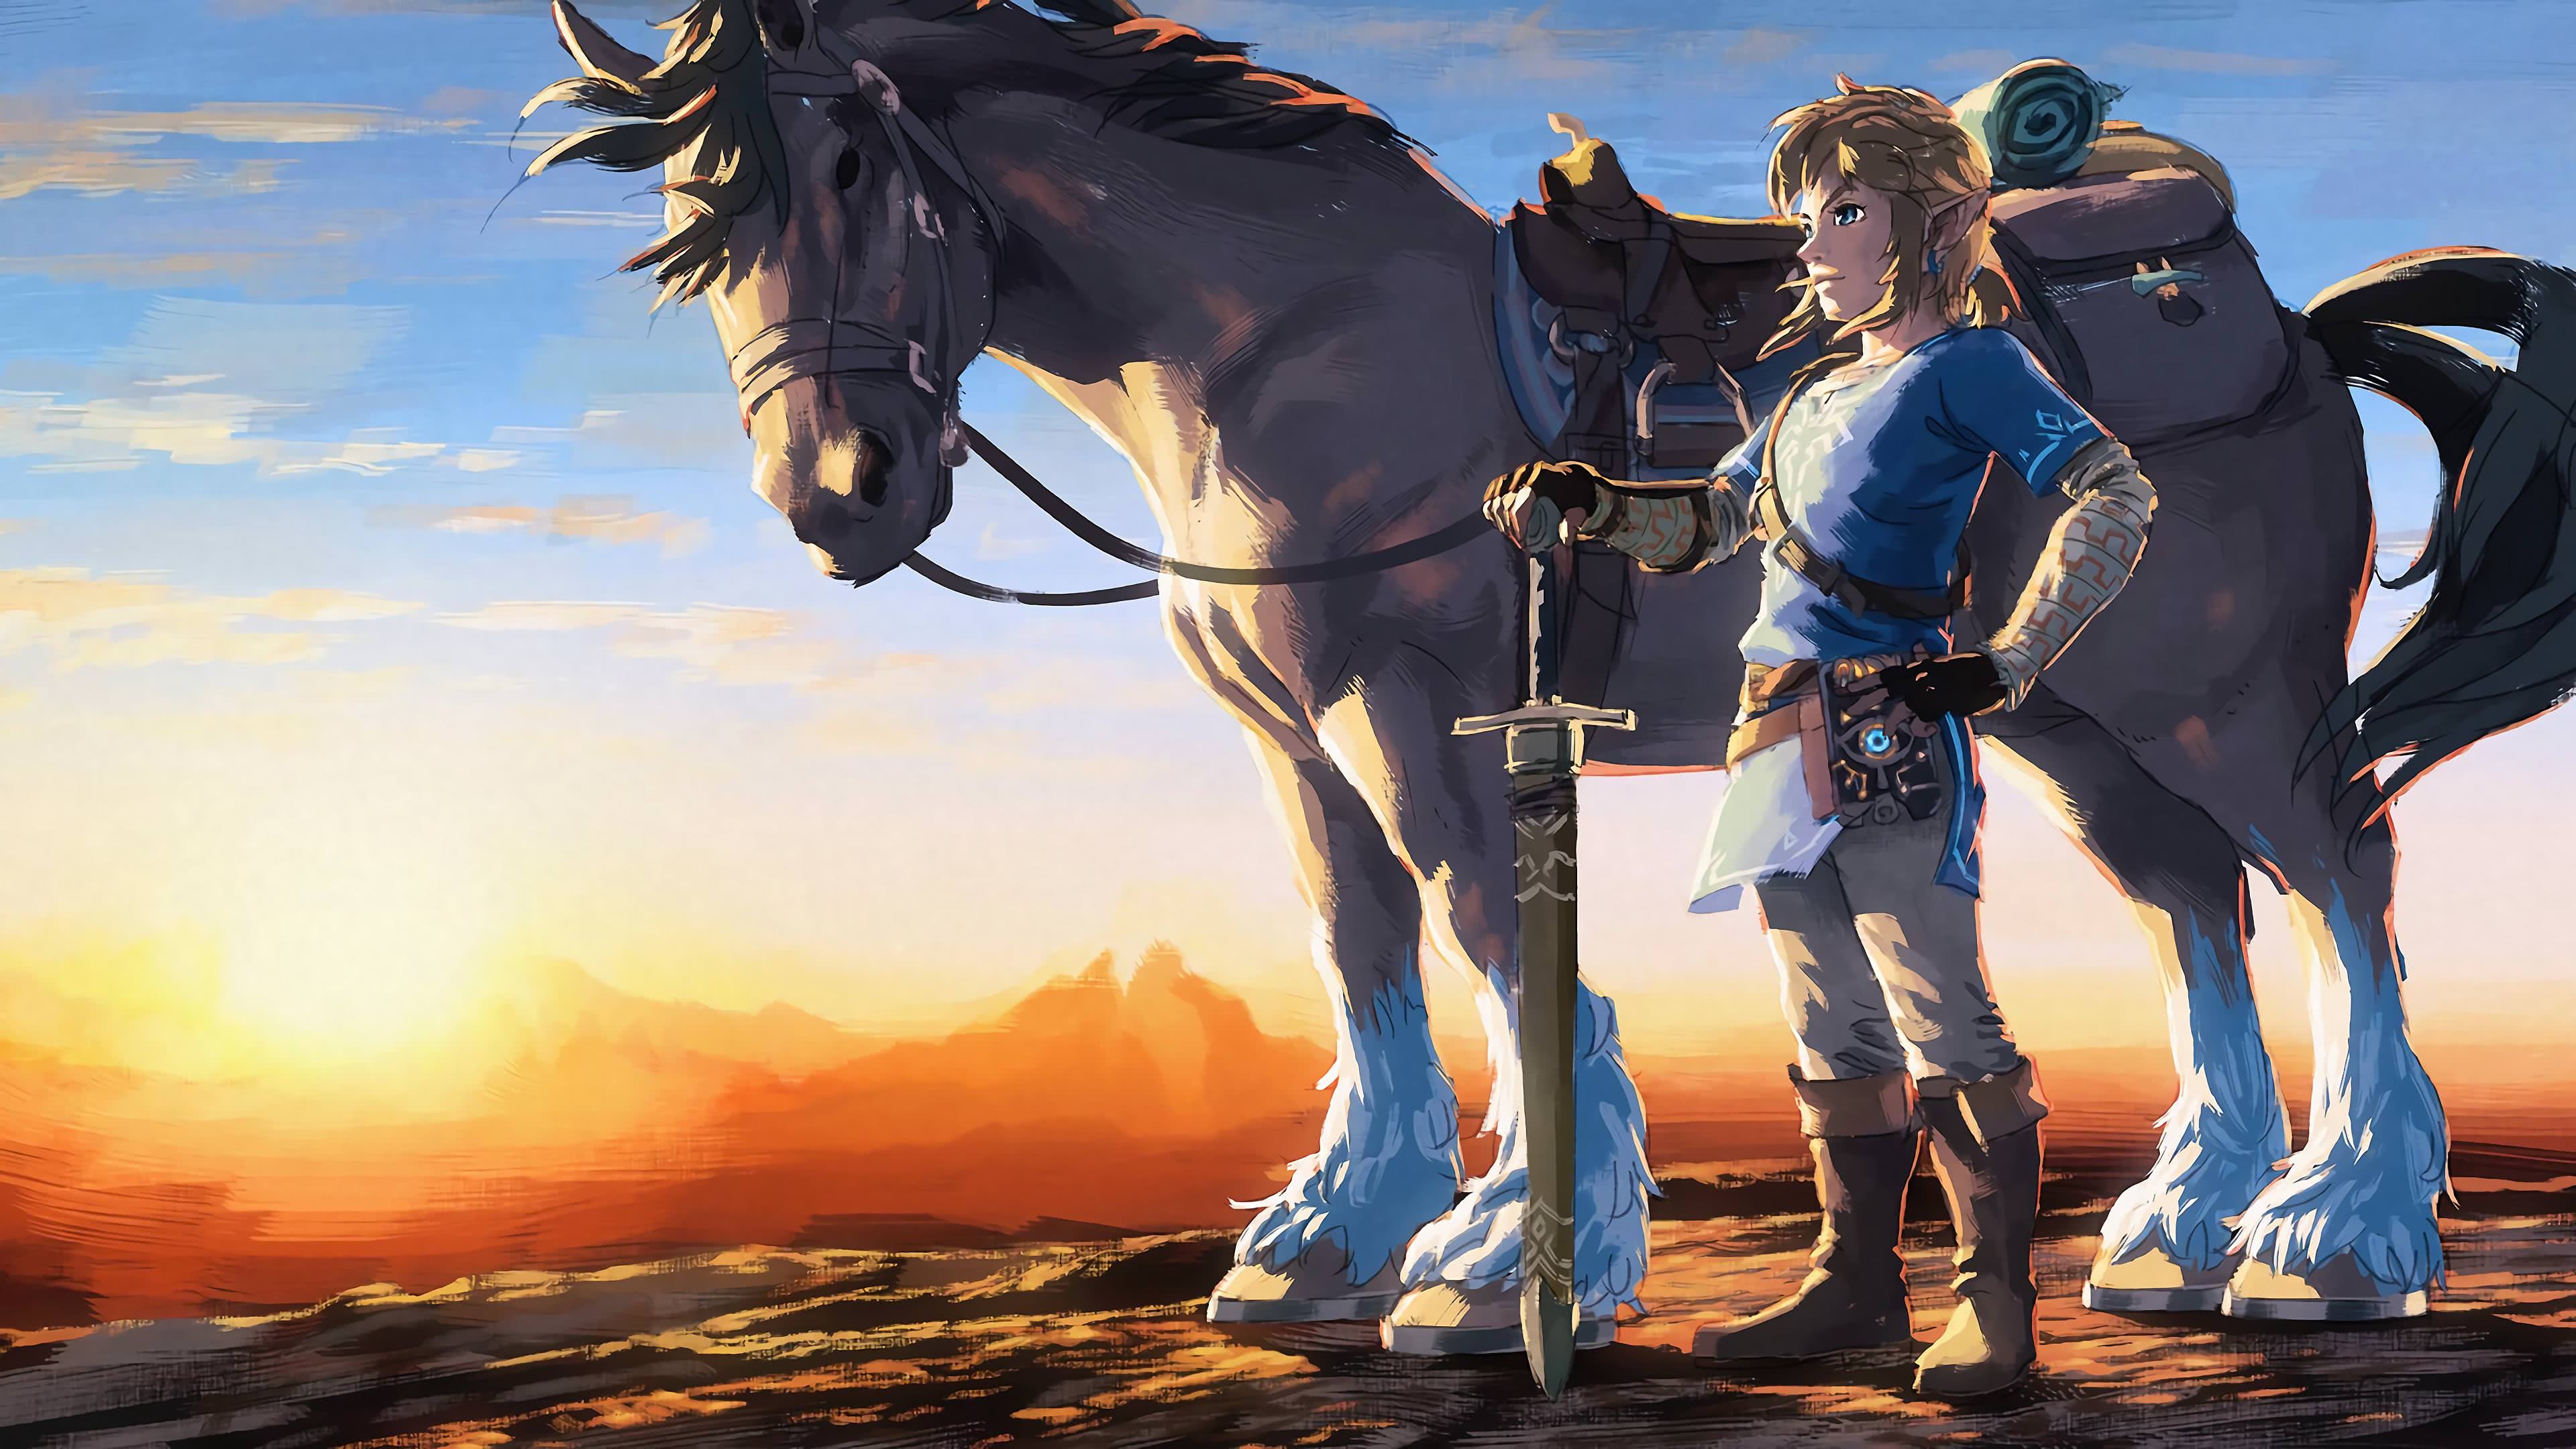 Breath of the Wild, Link and horse, UHD 4k wallpaper, Gaming masterpiece, 3840x2160 4K Desktop